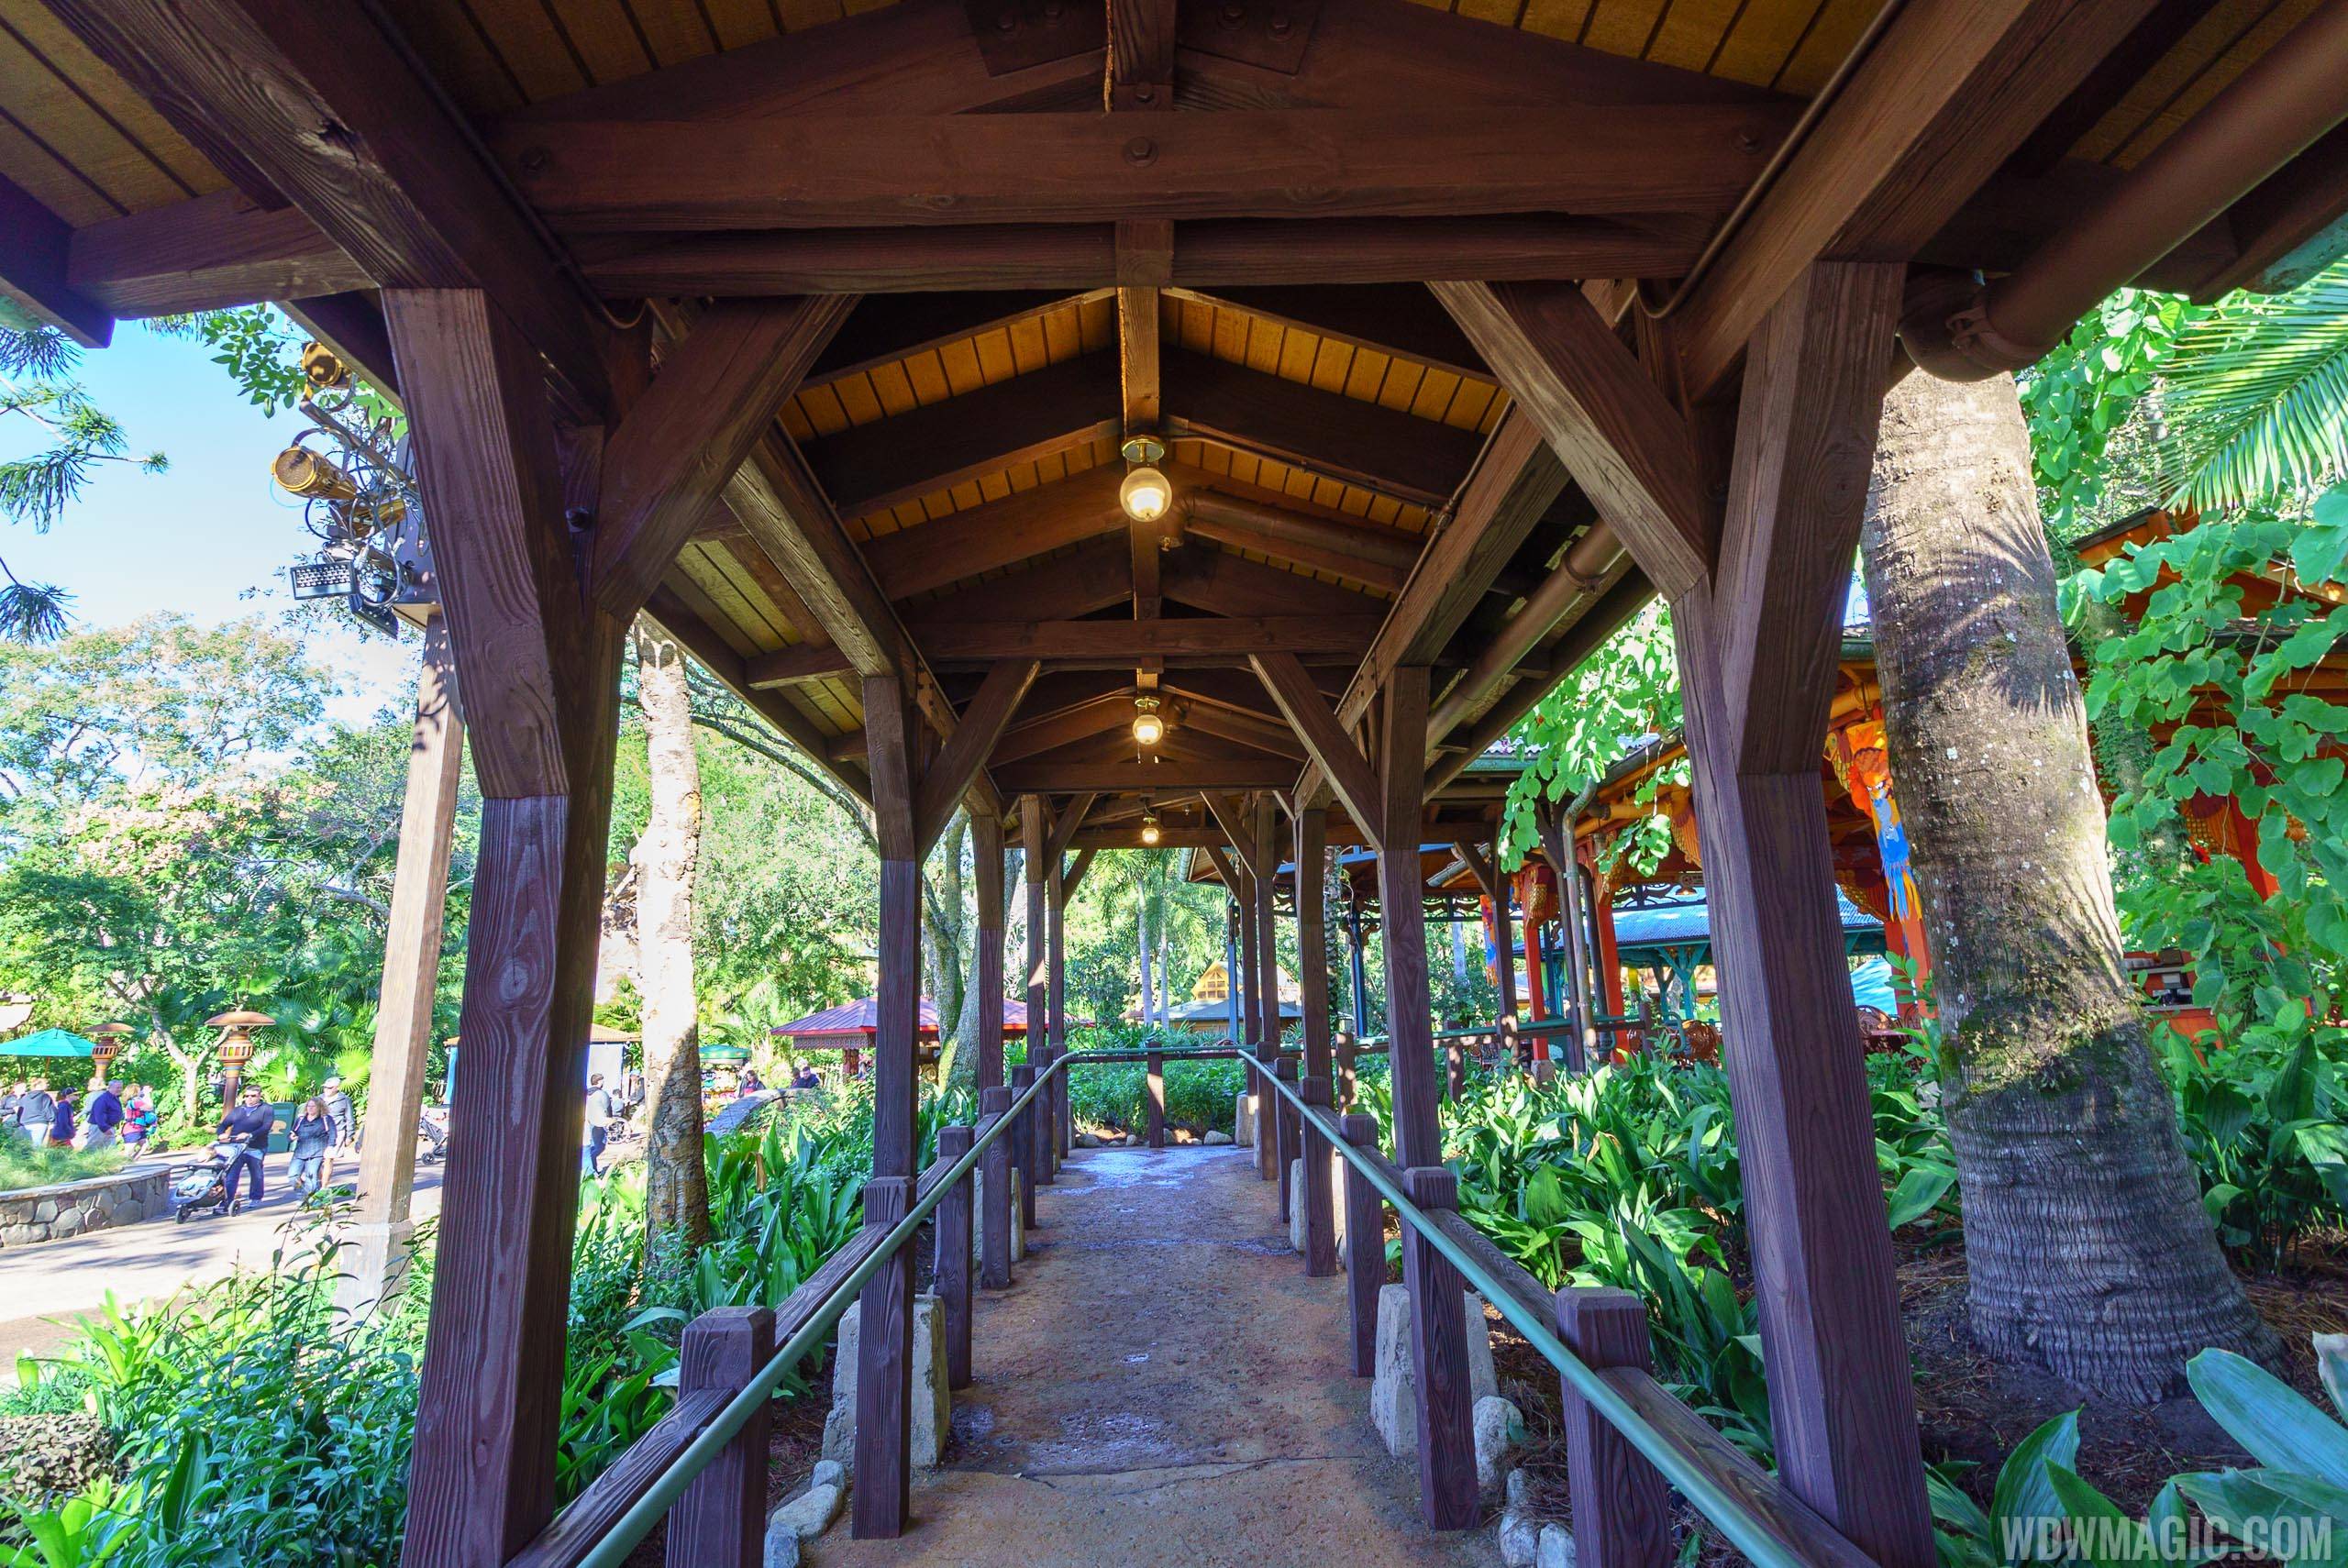 New seating at Flame Tree Barbecue